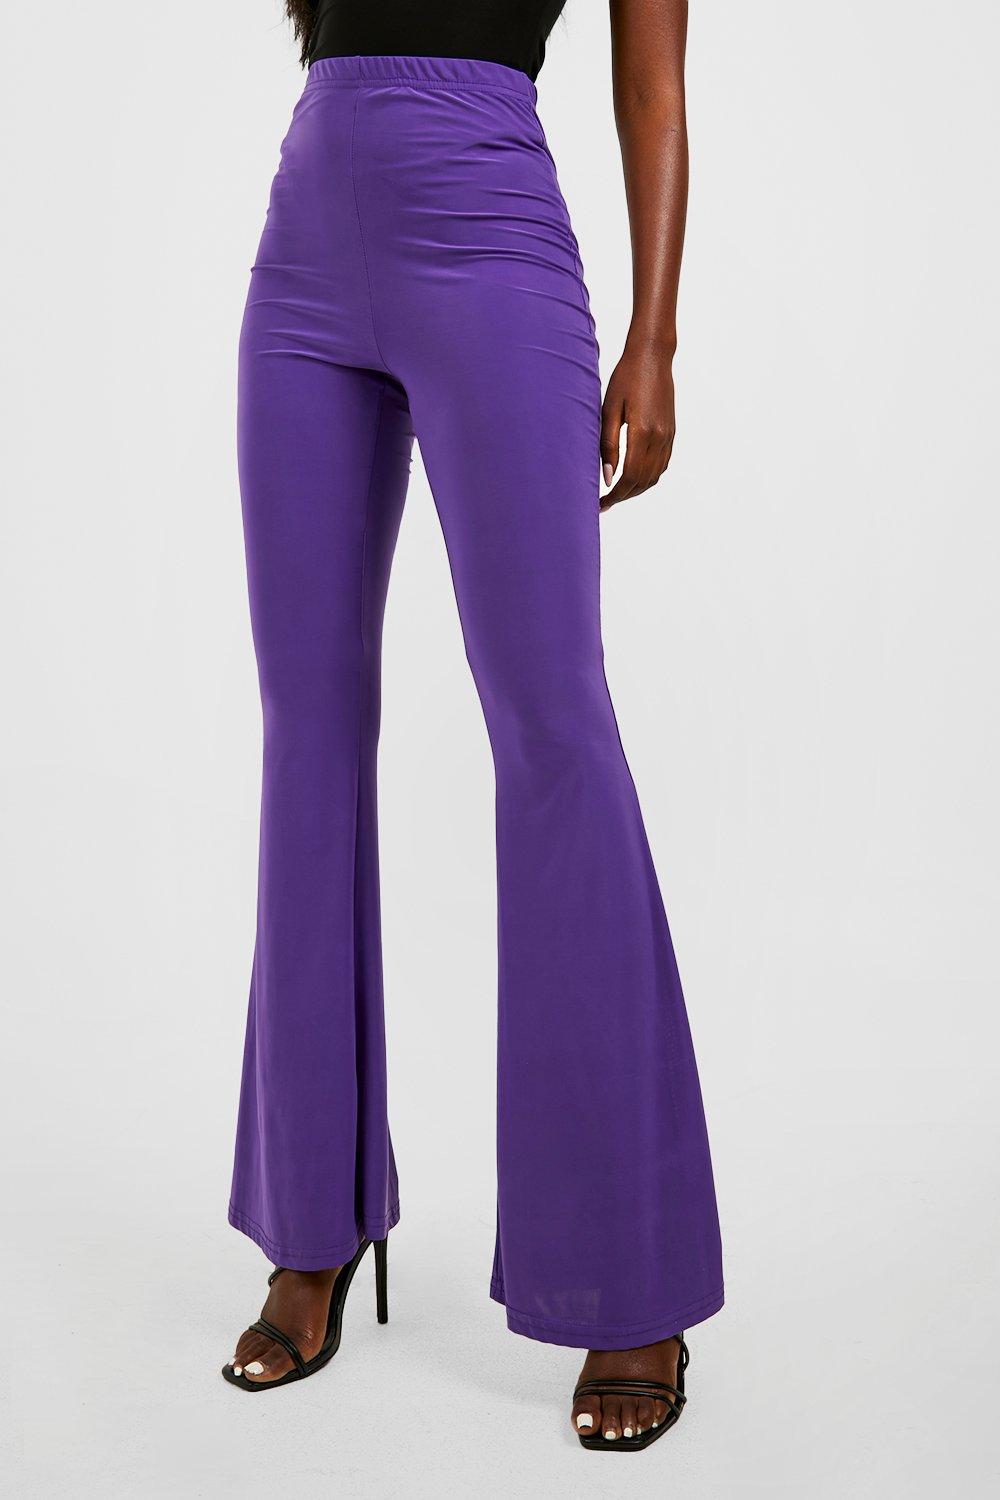 Rational doll Stop by Slinky High Waisted Flared Pants | boohoo